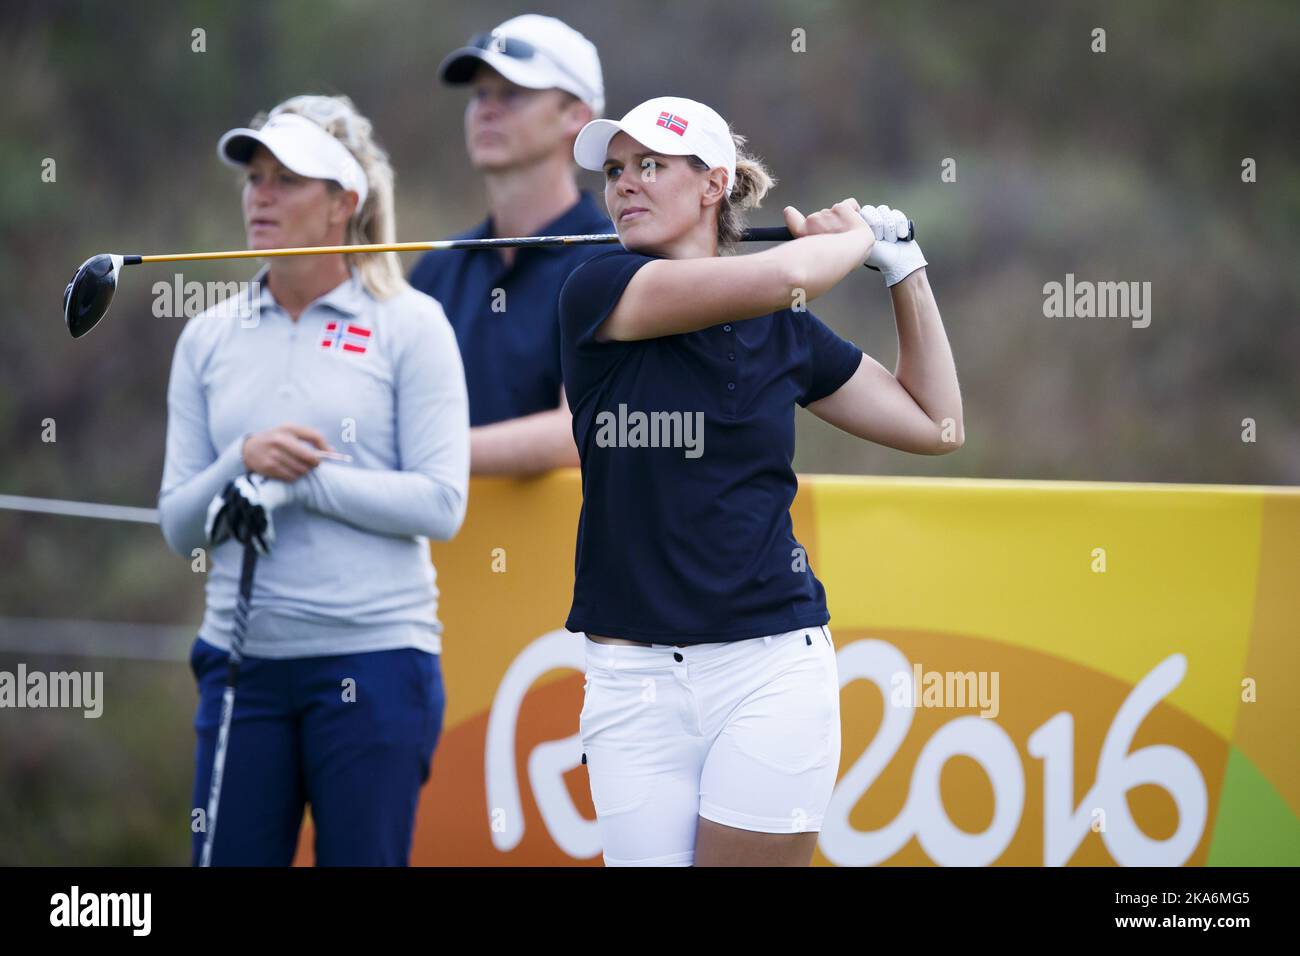 RIO DE JANEIRO, BRAZIL 20160815. Summer Olympics in Rio 2016 Golf players Marianne Skarpenord (right) and Suzann Pettersen practice at the Olympic Golf Course in Rio de Janeiro Monday. Photo: Heiko Junge / NTB scanpix Stock Photo